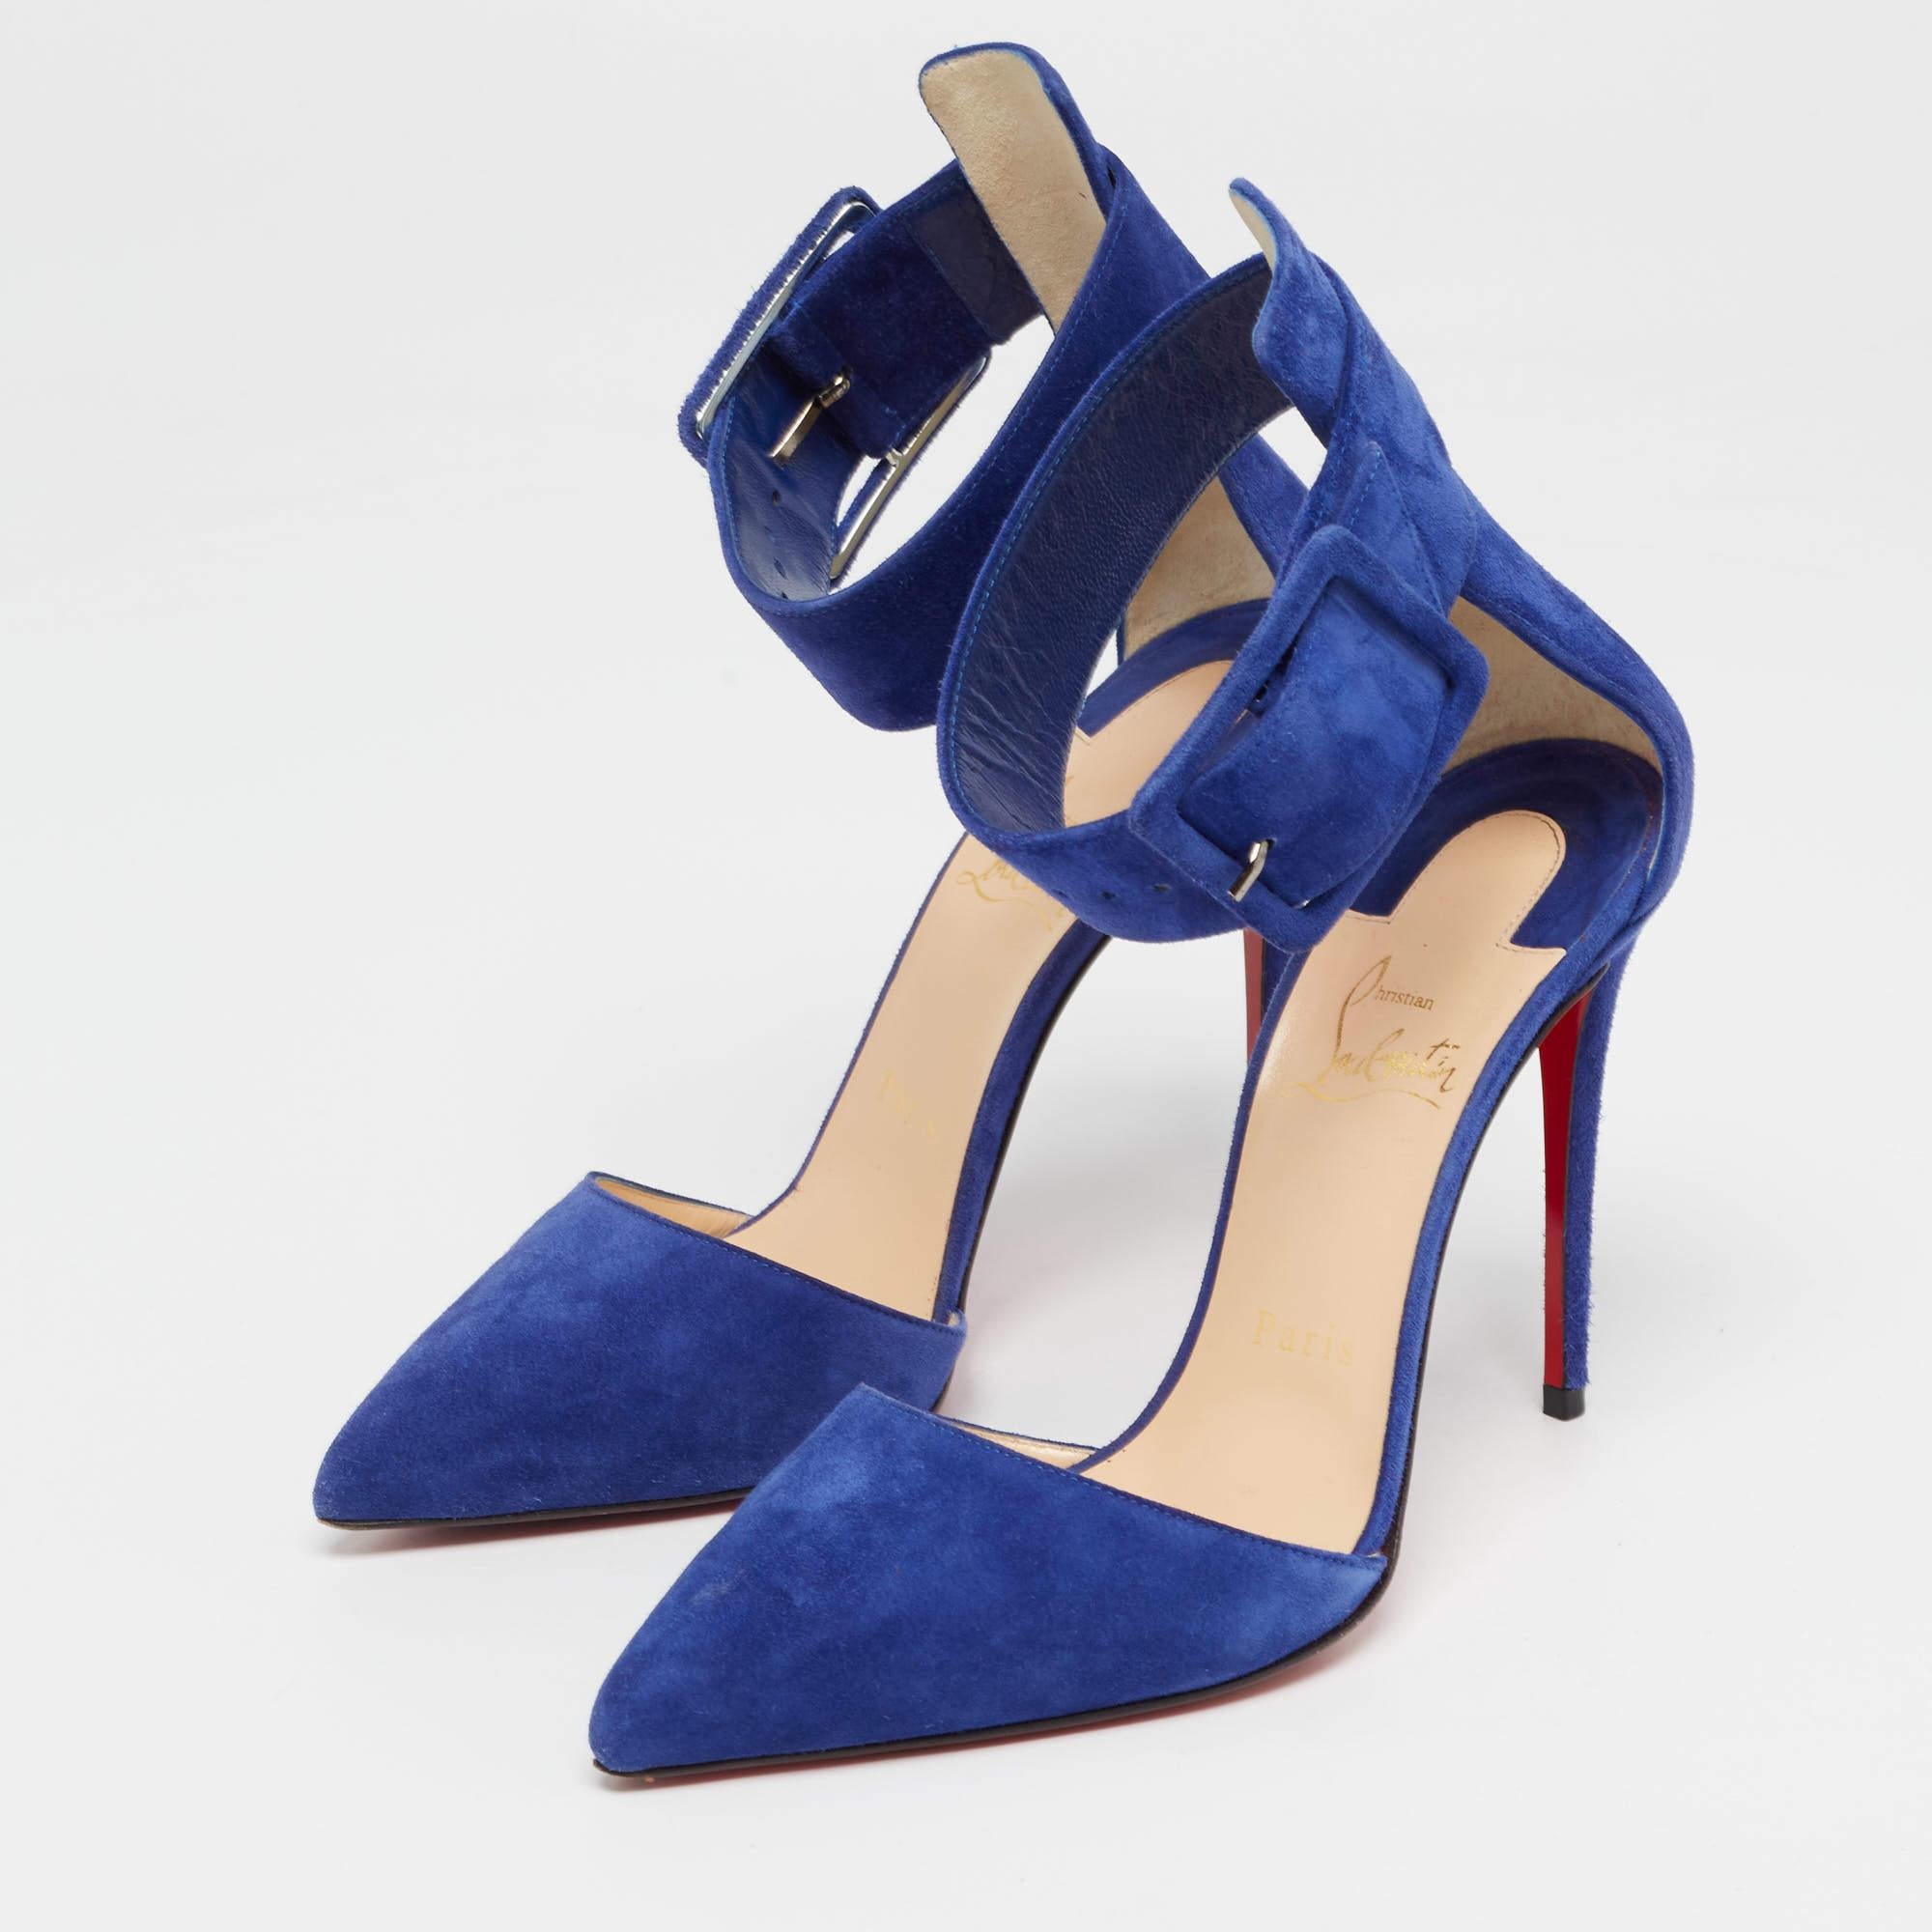 A feminine flair and a sophisticated appeal characterize these stunning Christian Louboutin pumps. Crafted using quality materials, they will add an opulent charm to your look and complement many looks that you would want to create.

Includes: